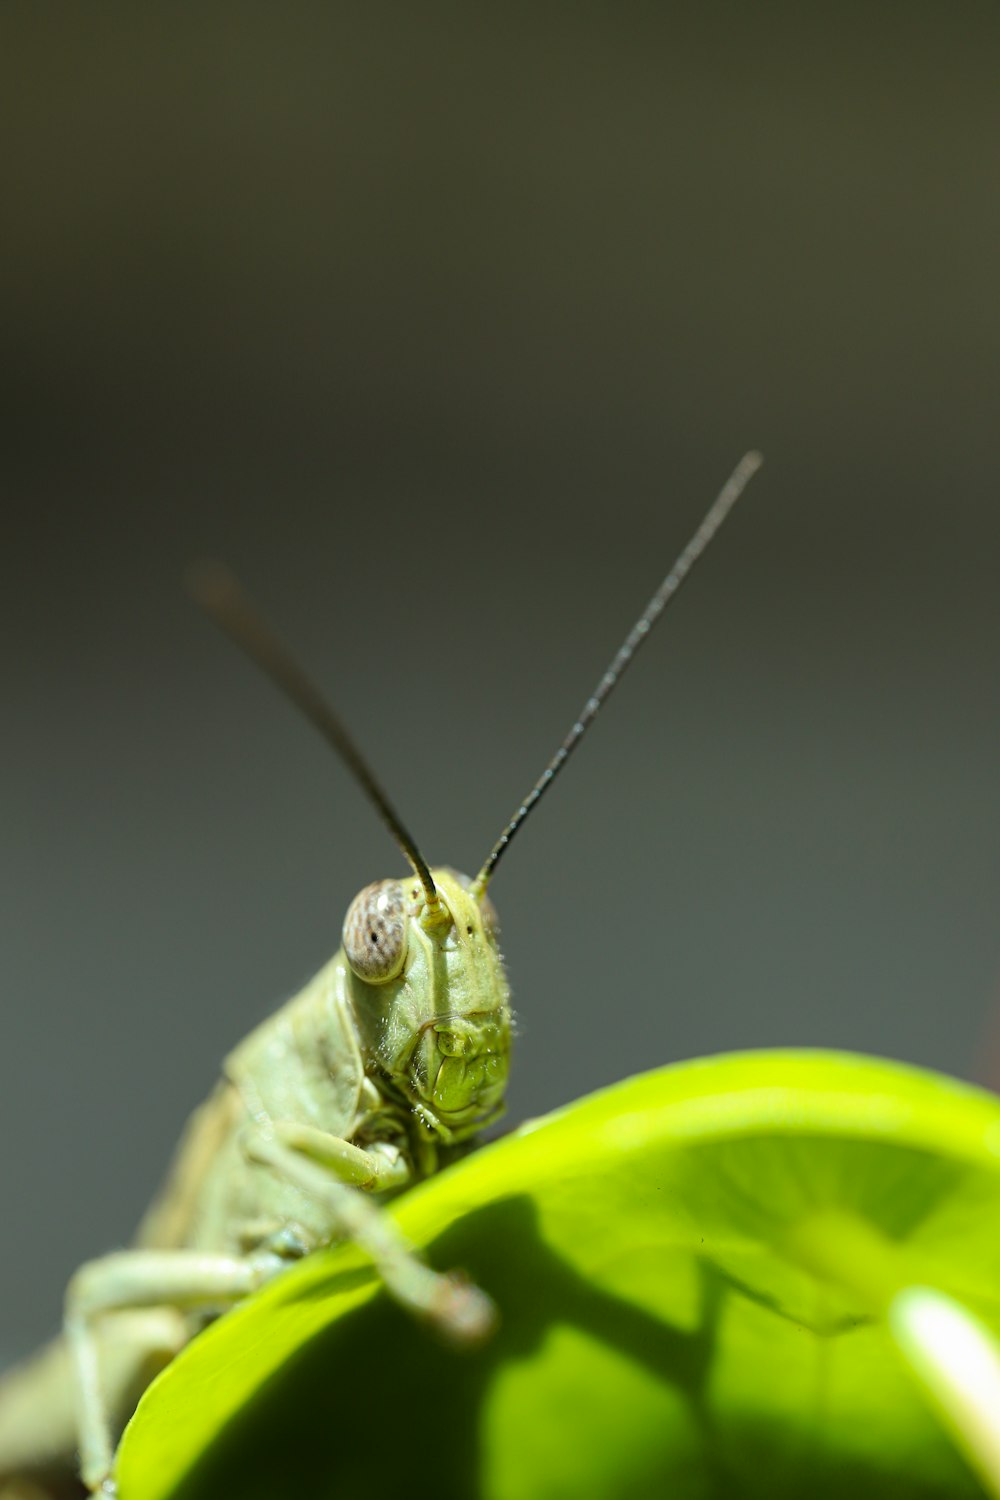 green grasshopper perched on green leaf in close up photography